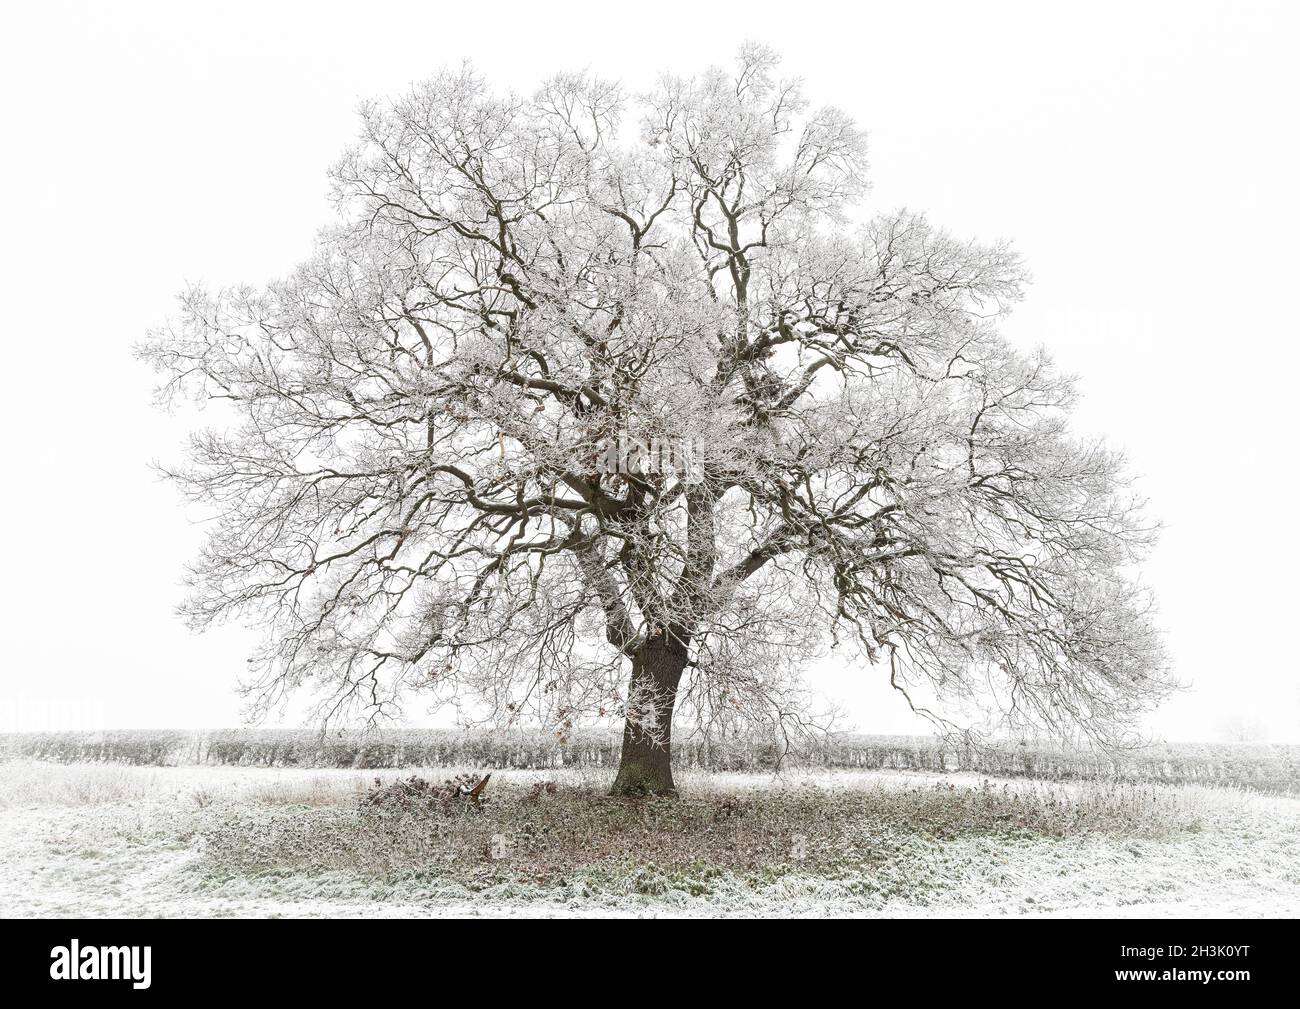 A winter scene of an English Oak (Quercus ruber) or Pendunculate Oak, covered in frost and isolated against the sky. Stock Photo